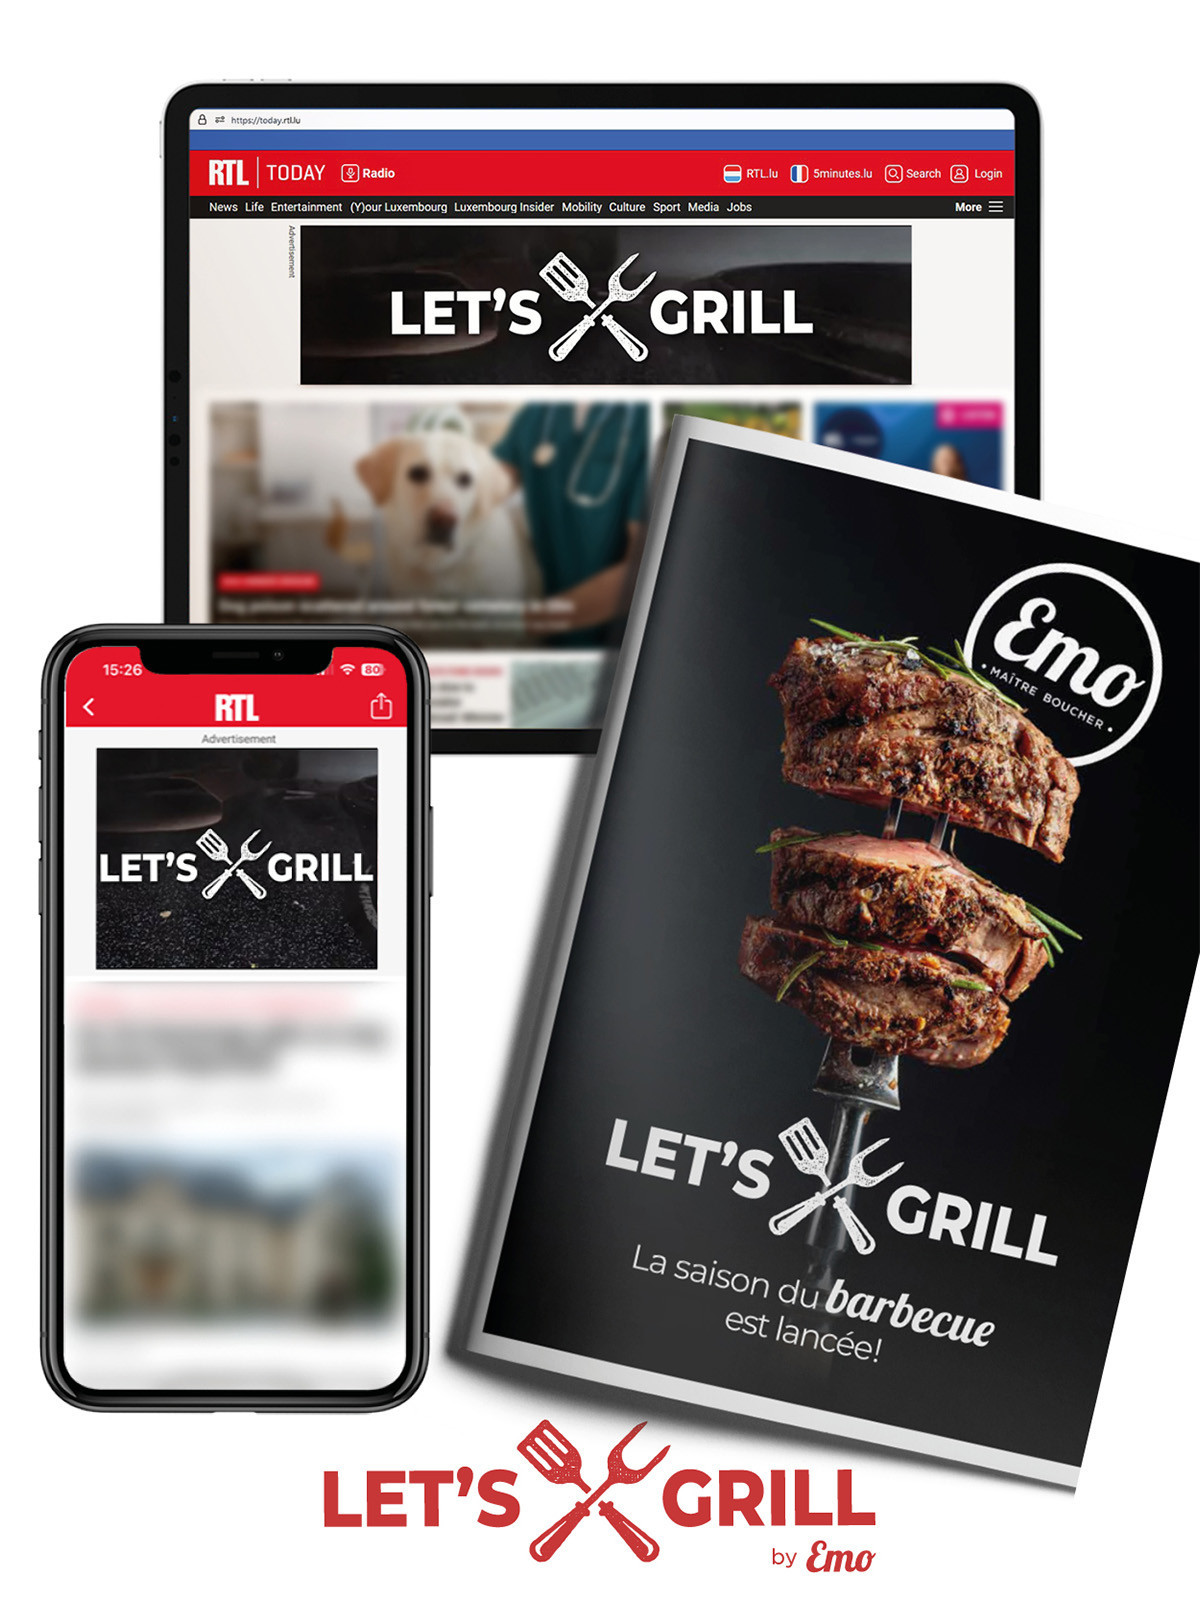 Campaign : Let's grill  (Wait agency) 